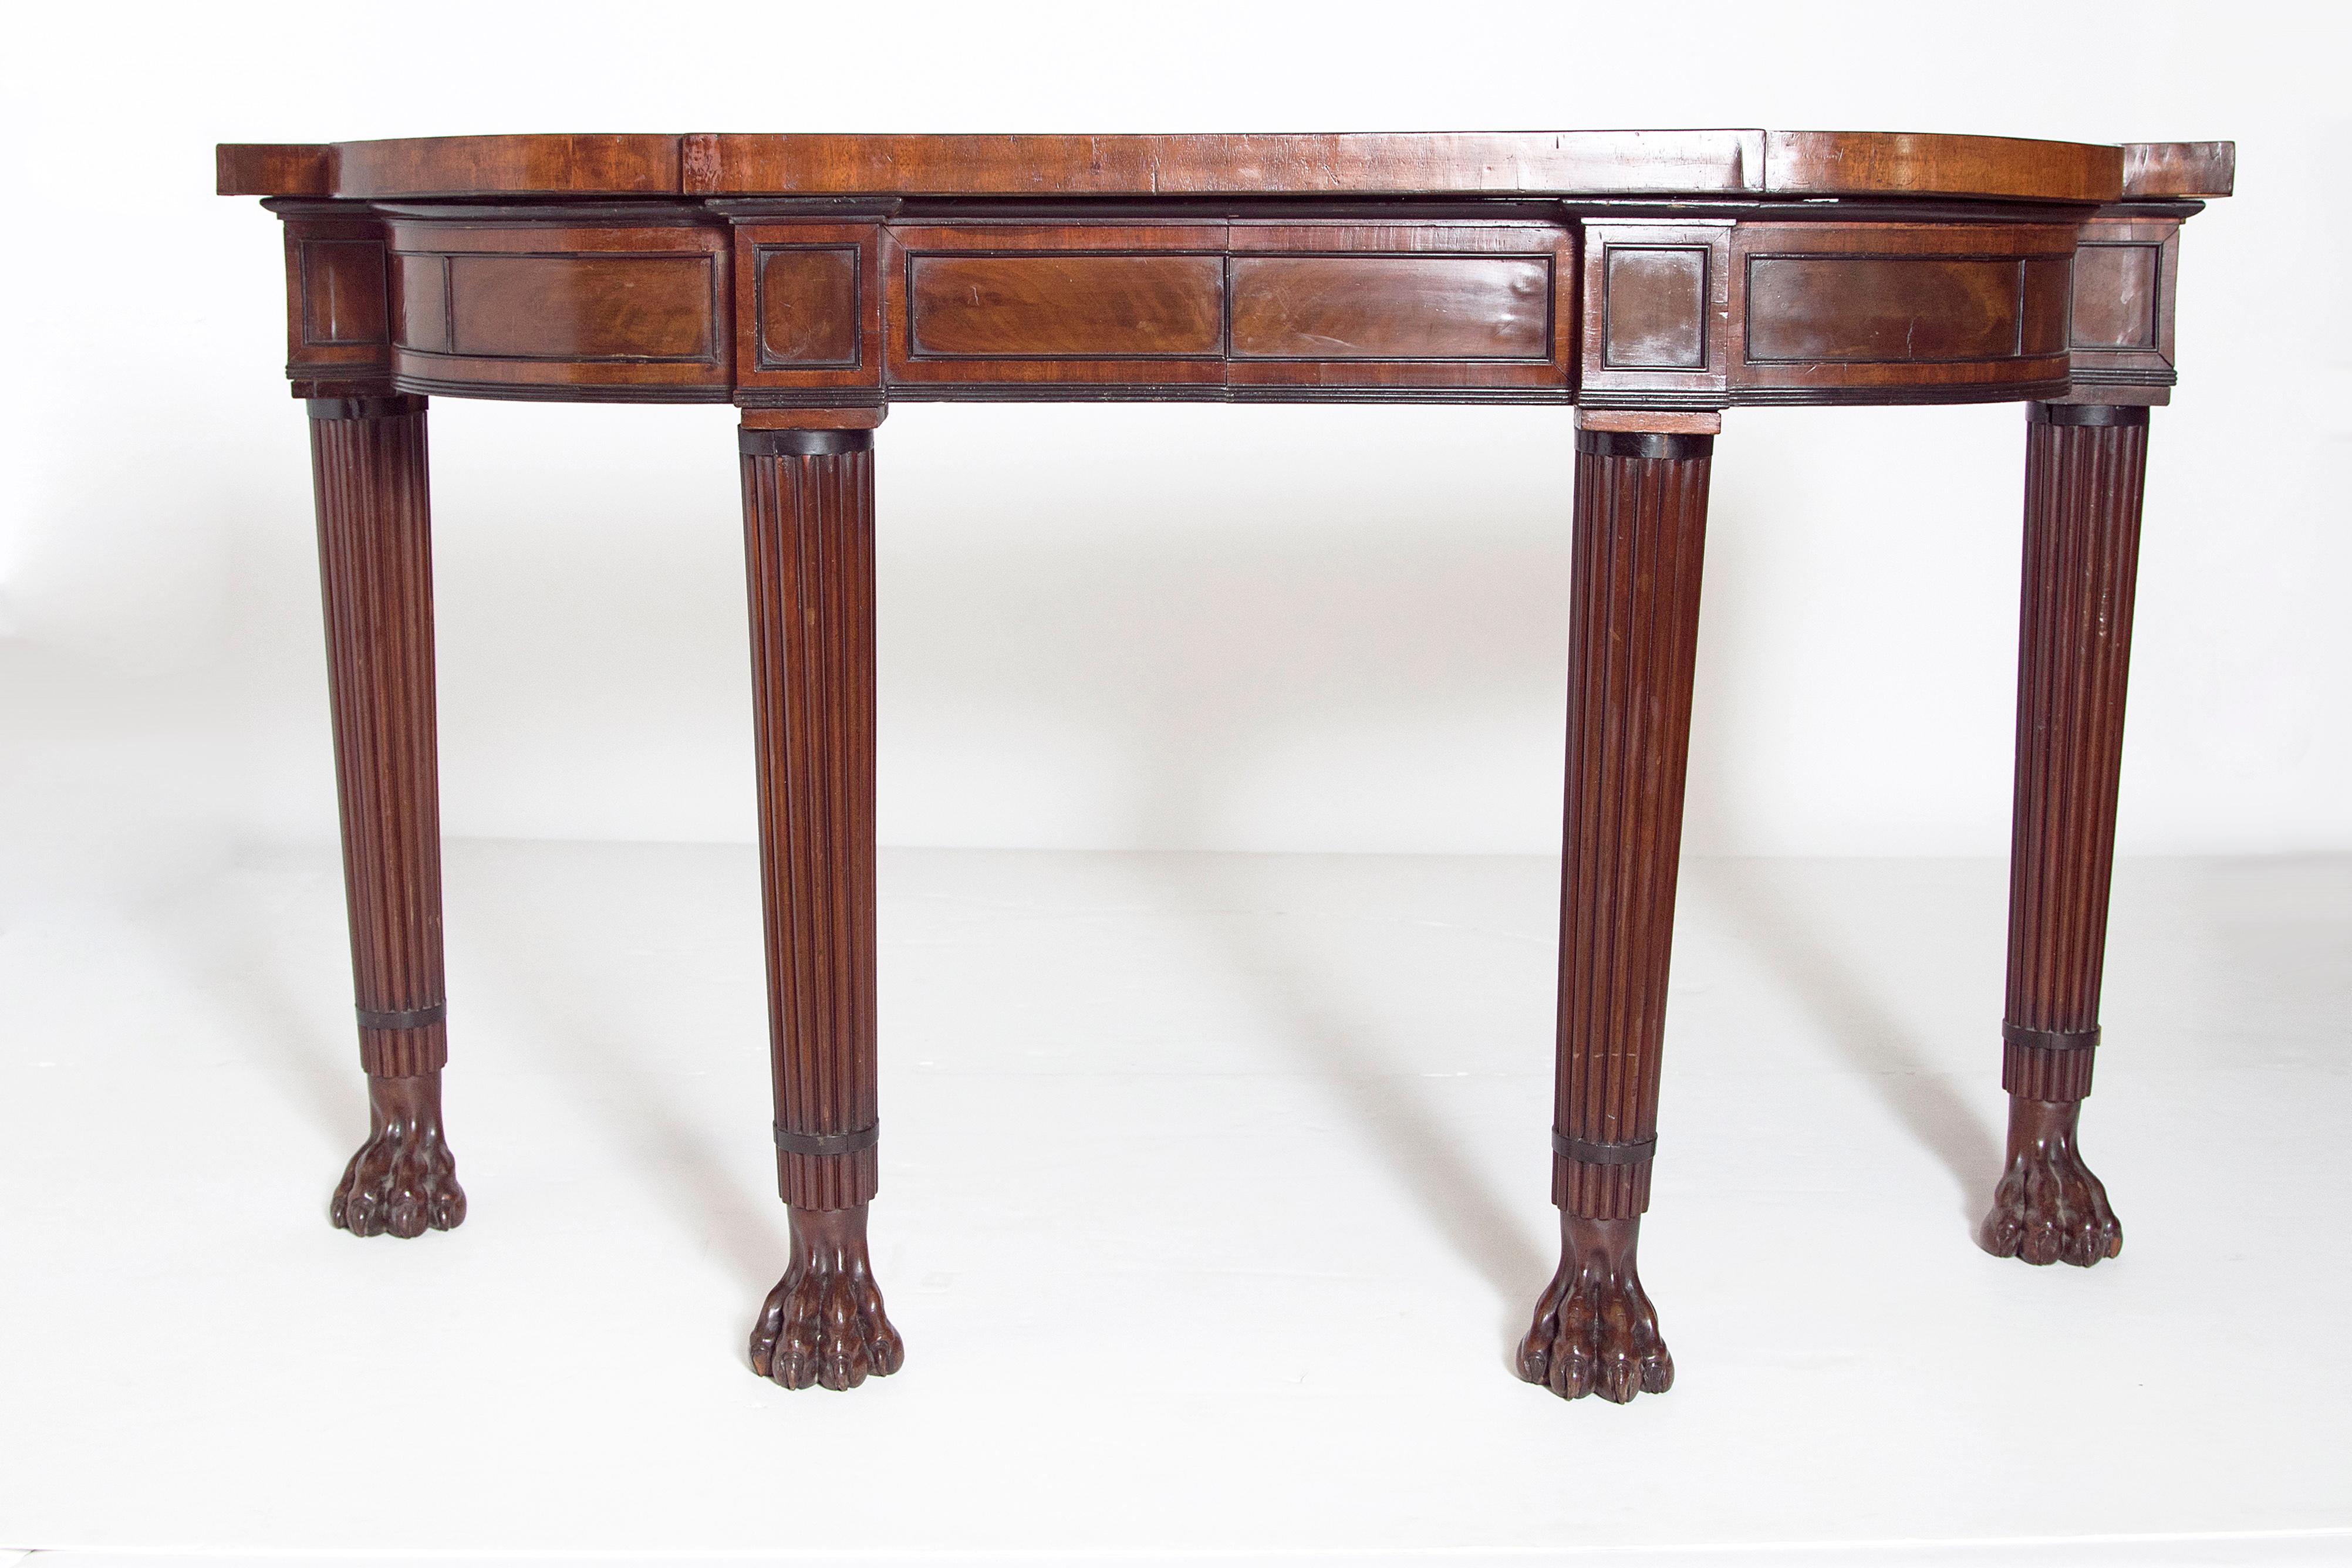 English Regency console table of mahogany with a shaped top and apron. Supported on four round reeded legs terminating in large paw feet.